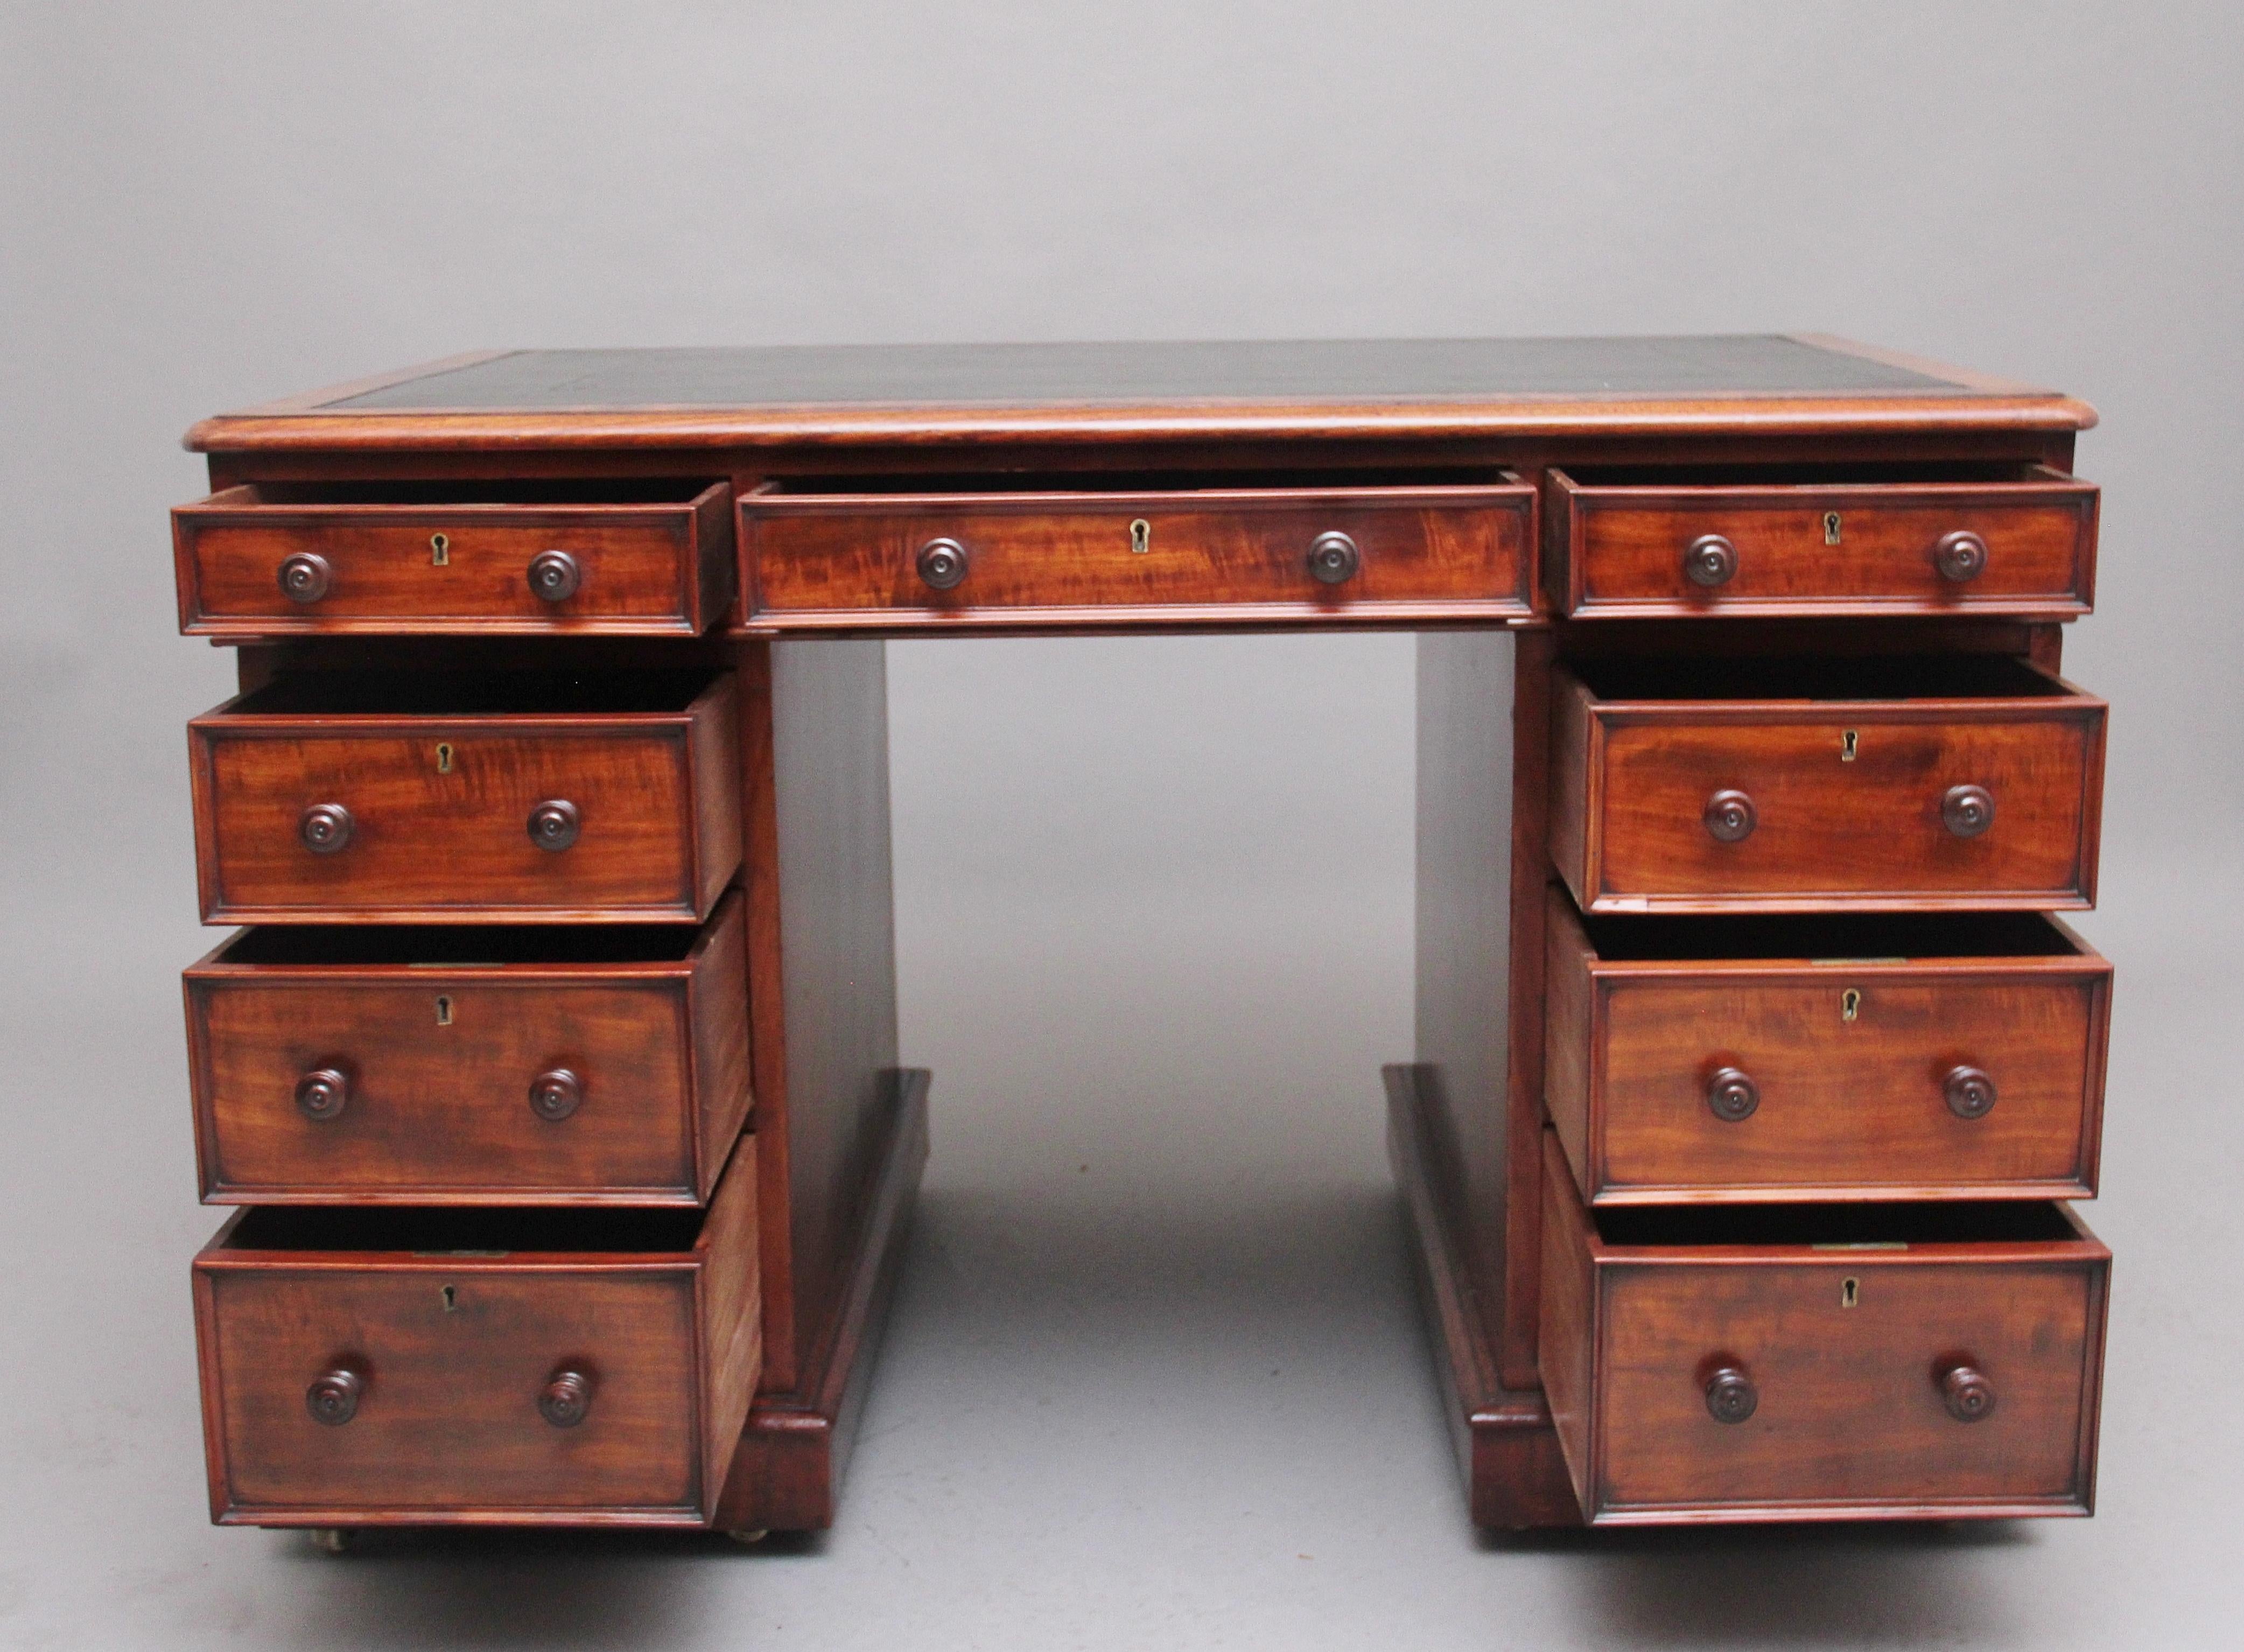 A superb quality early 19th century mahogany pedestal desk, the moulded edge top having a green leather writing surface decorated with gold and blind tooling, the desk has an arrangement of nine graduated mahogany lined drawers with the original